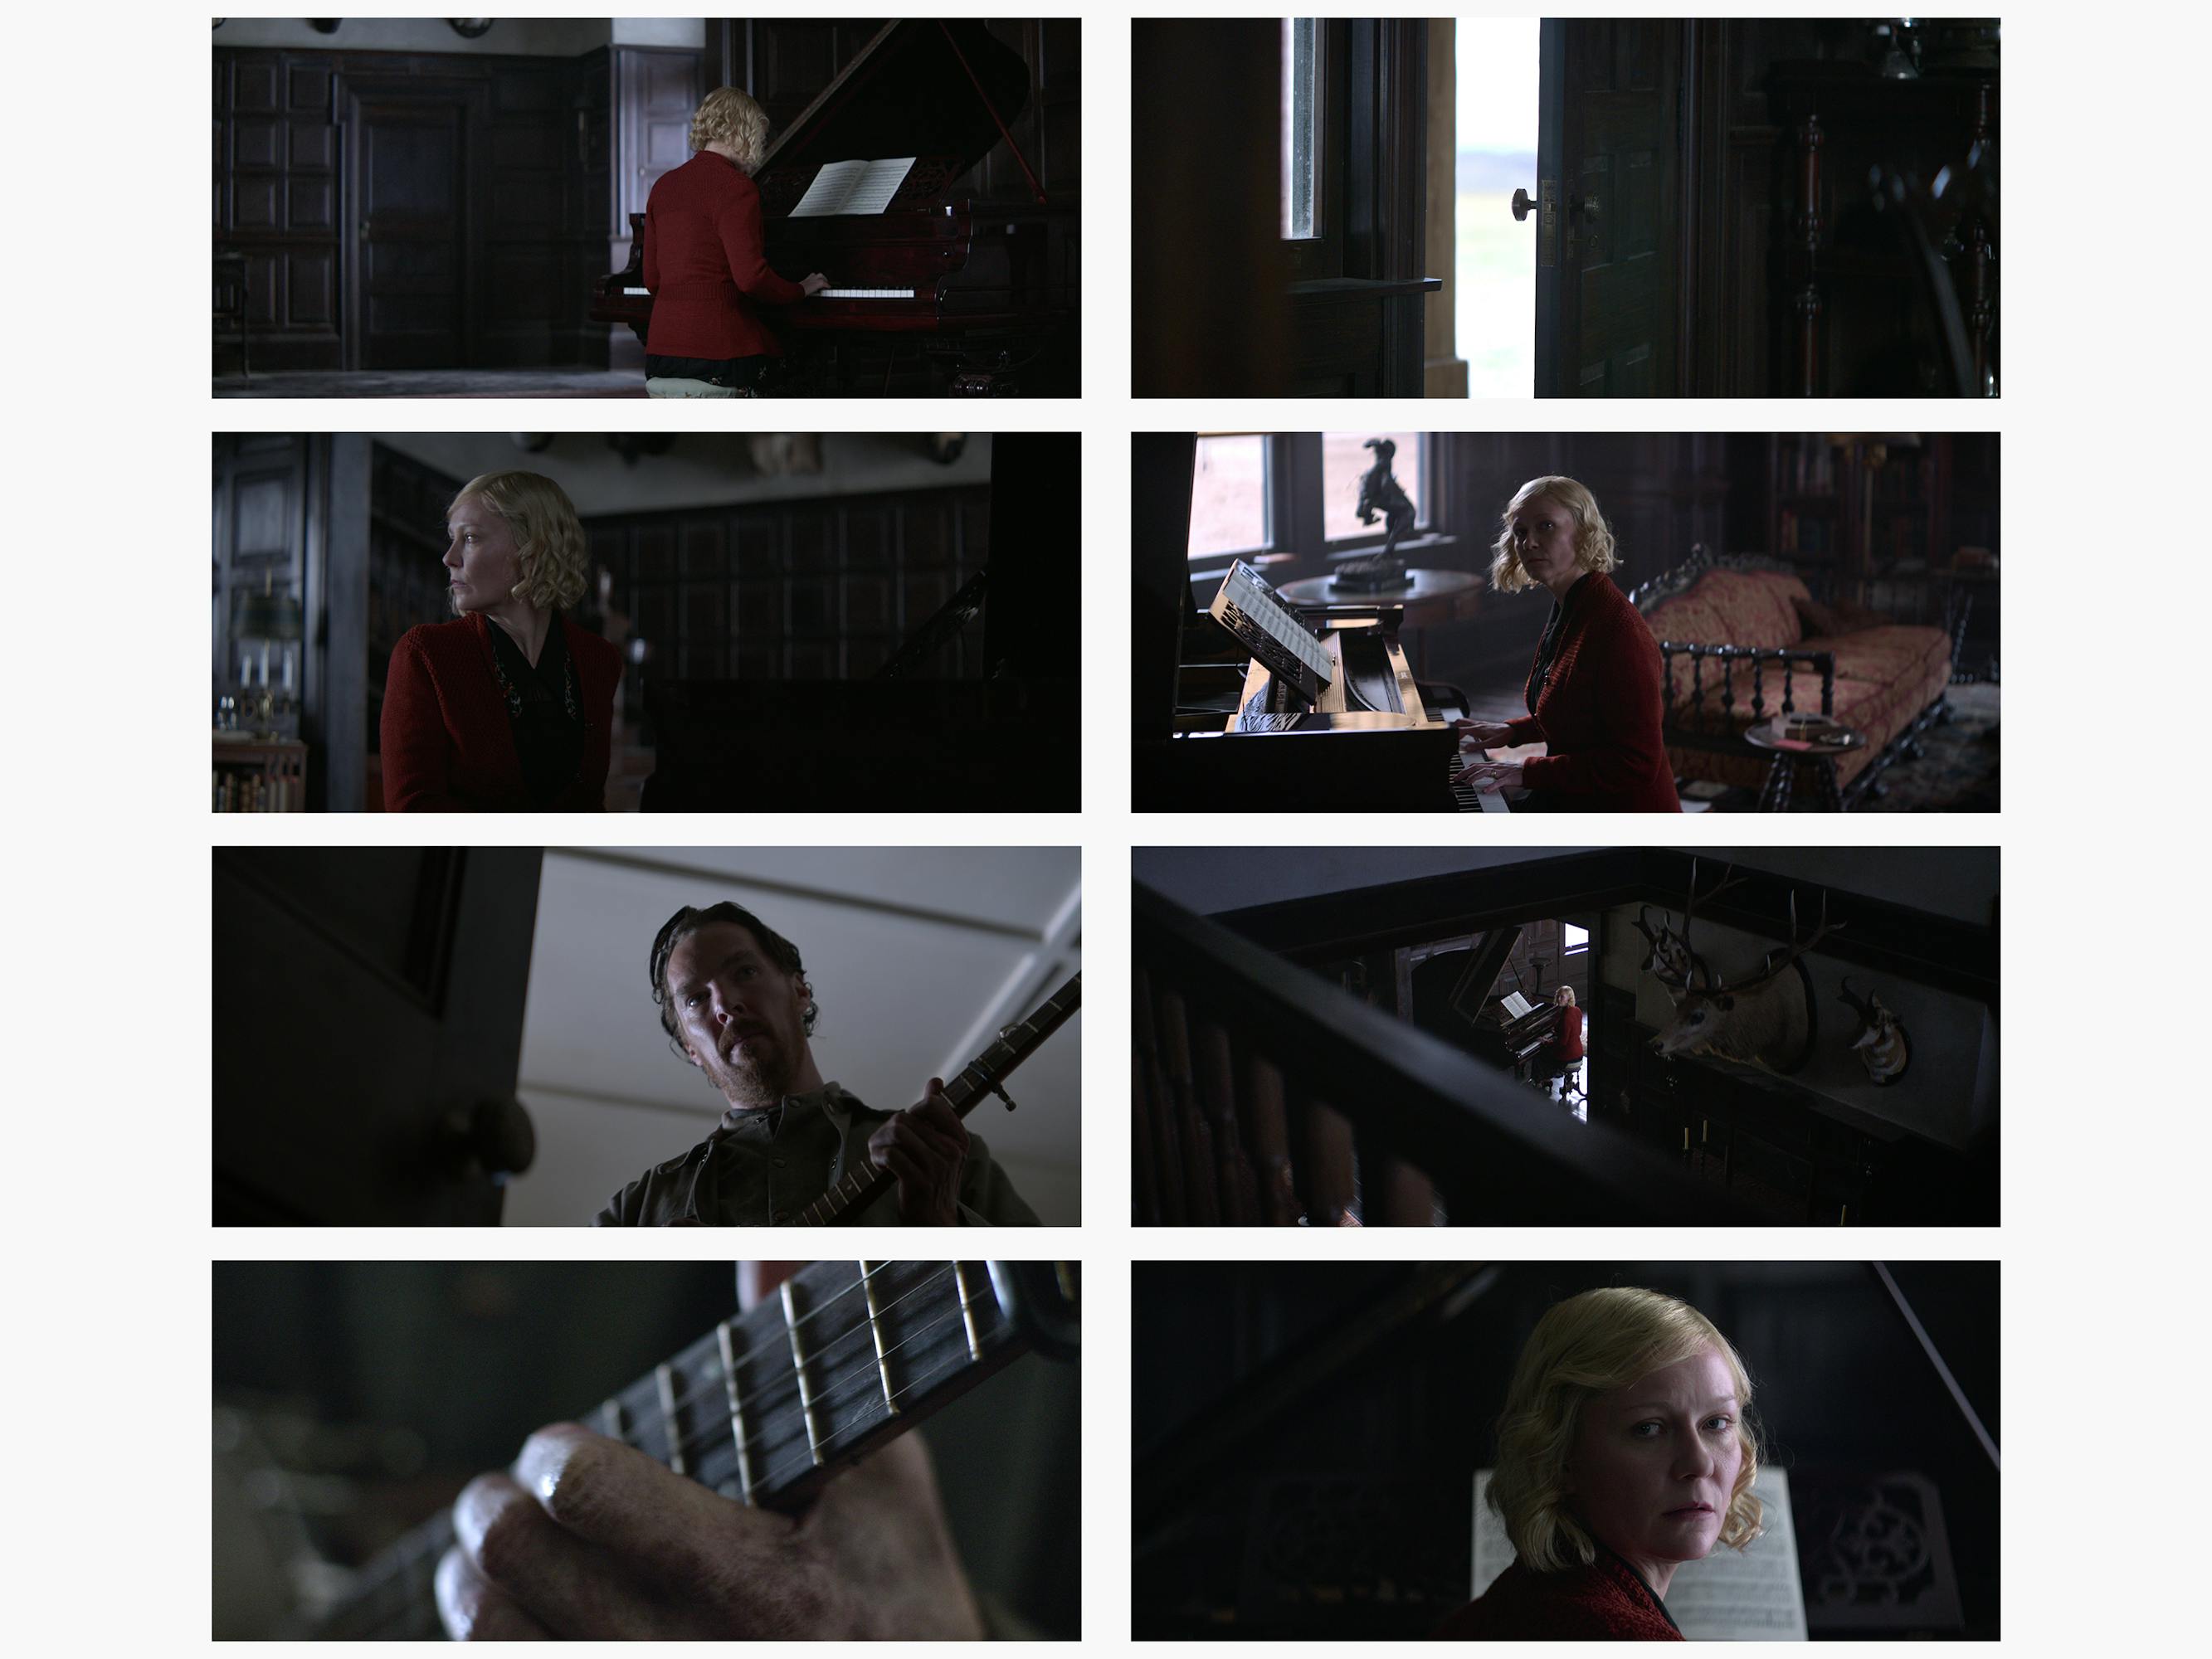 Eight stills from The Power of the Dog are in a grid to visualize the editing sequence of a scene between Rose Gordon (Kirsten Dunst) and Phil Burbank (Benedict Cumberbatch) as Rose is practicing a song on the piano rather poorly and Phil picks up his banjo to play the same song only much better in a childish display of competition. 